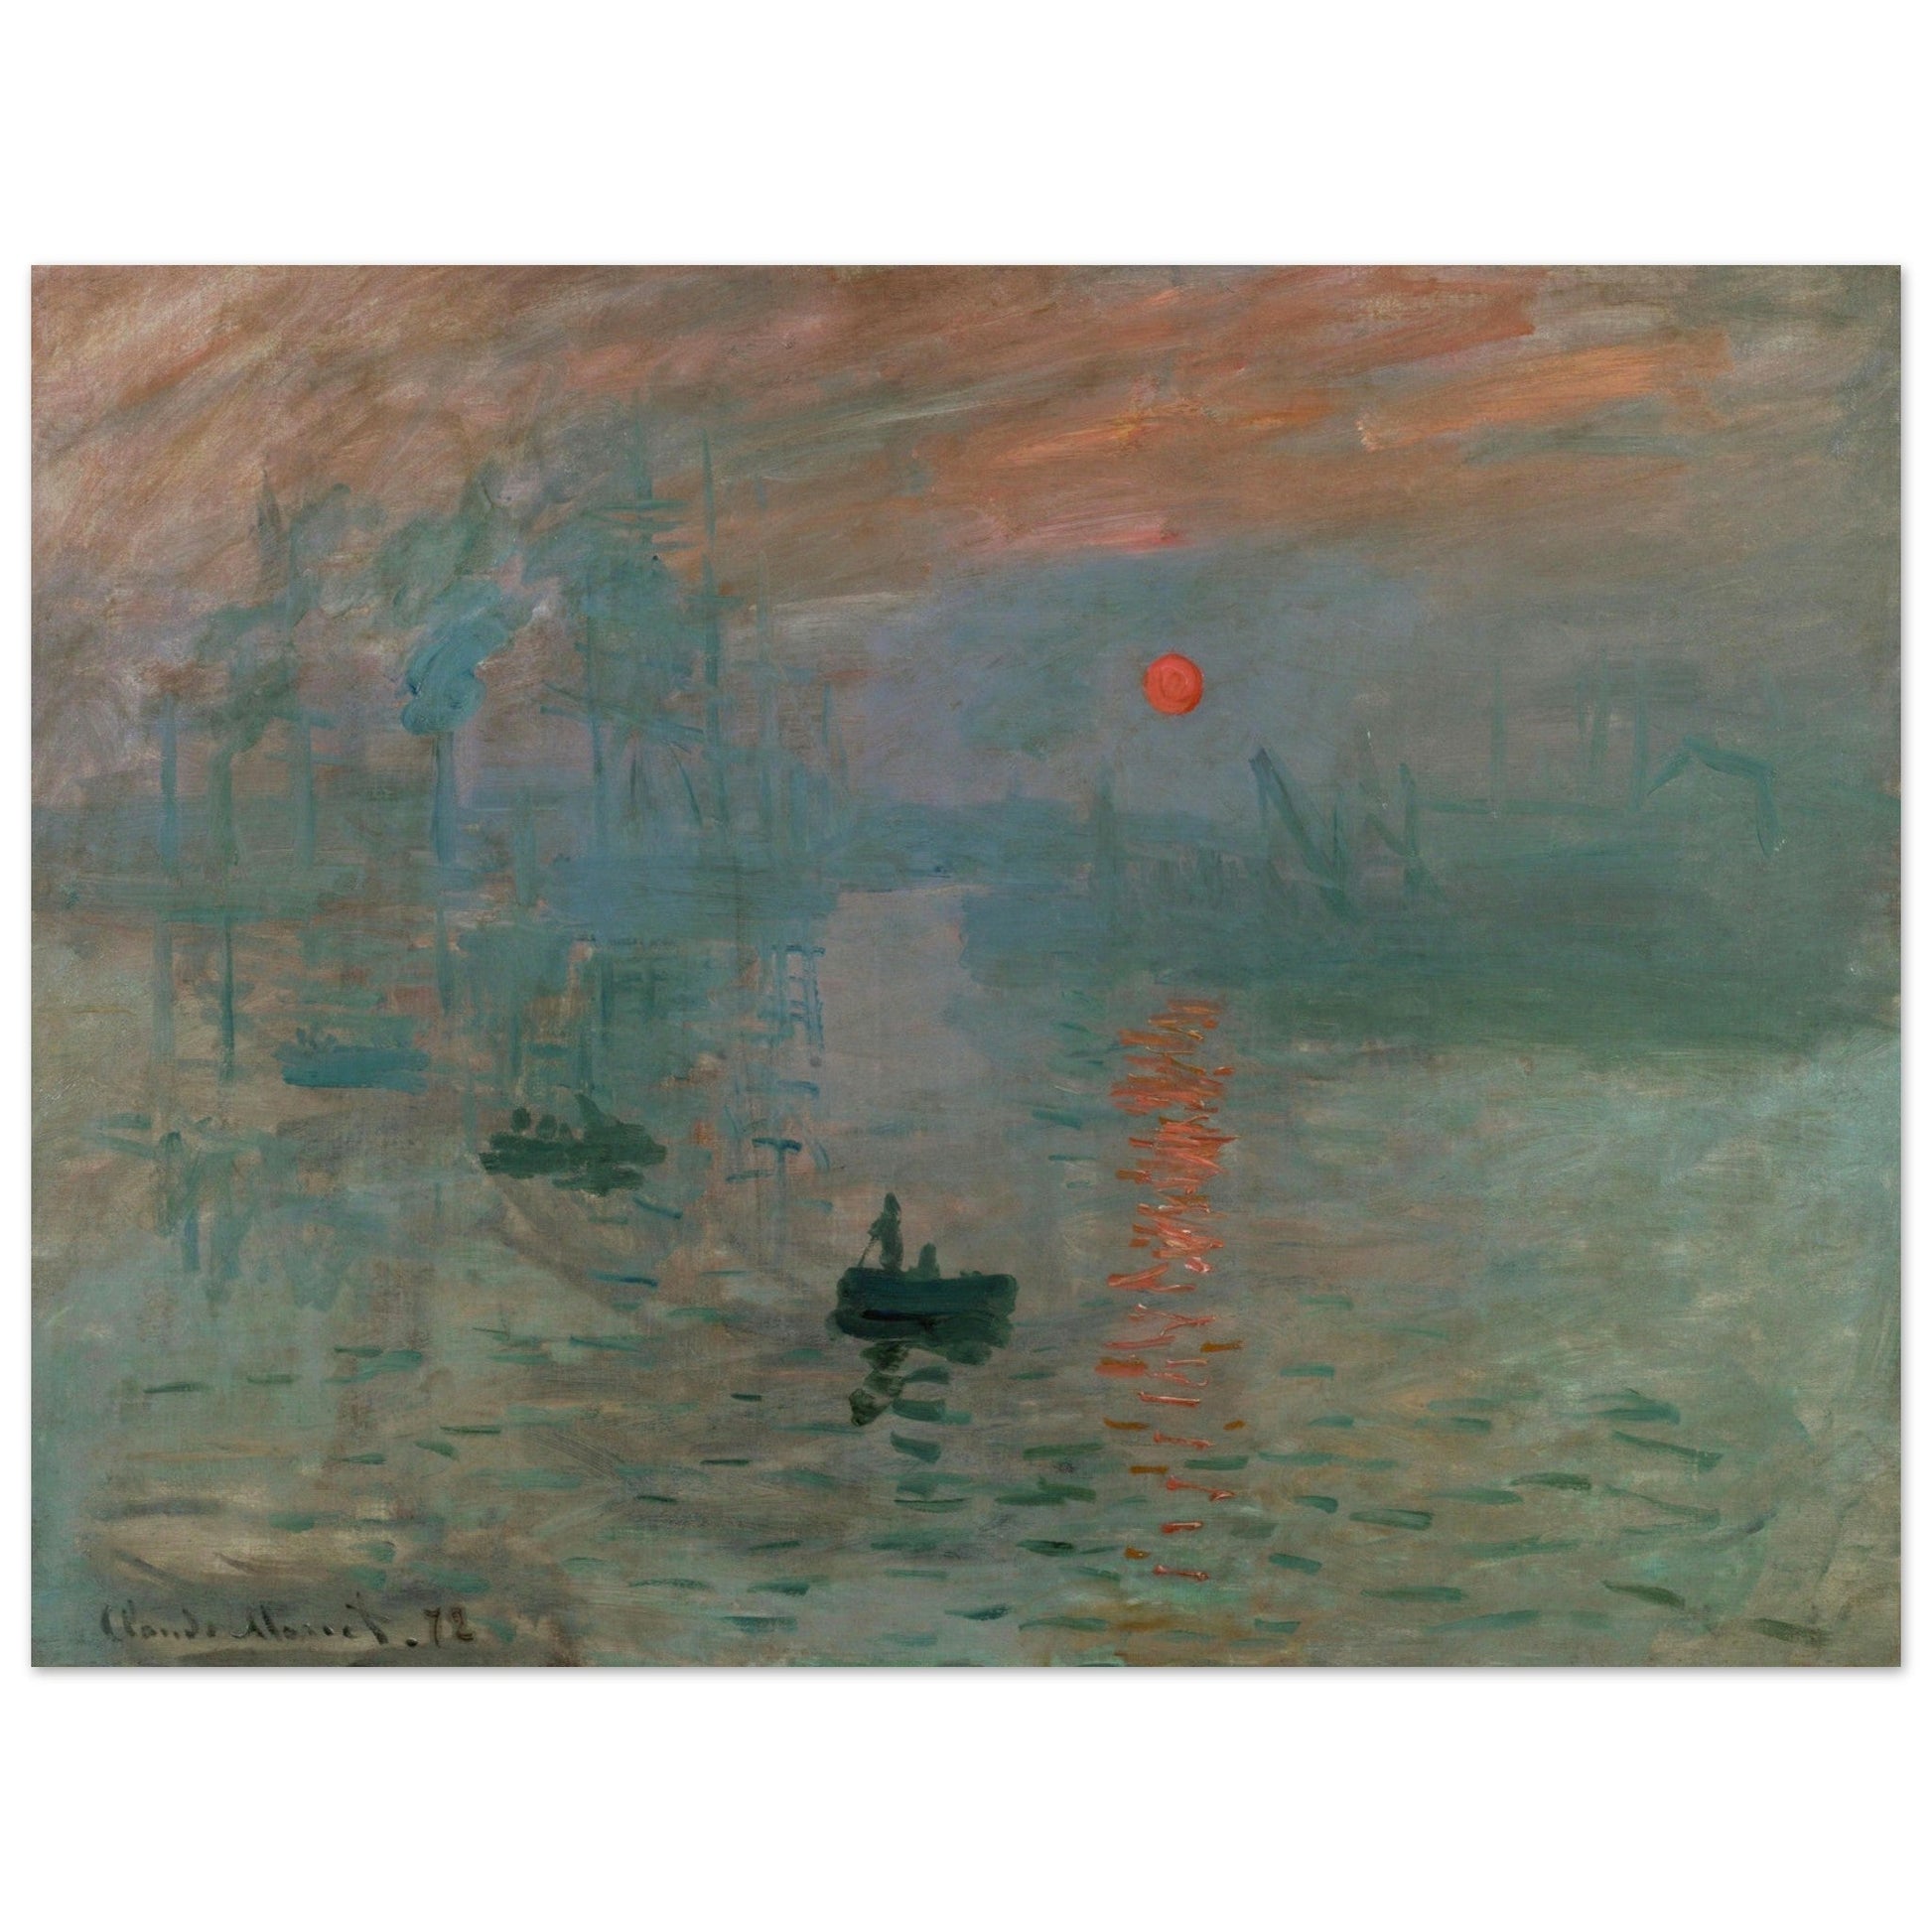 Impression, Sunrise's breathtaking colored wall art captures the exquisite moment of the sun rising over the water, making it the perfect poster for any room.